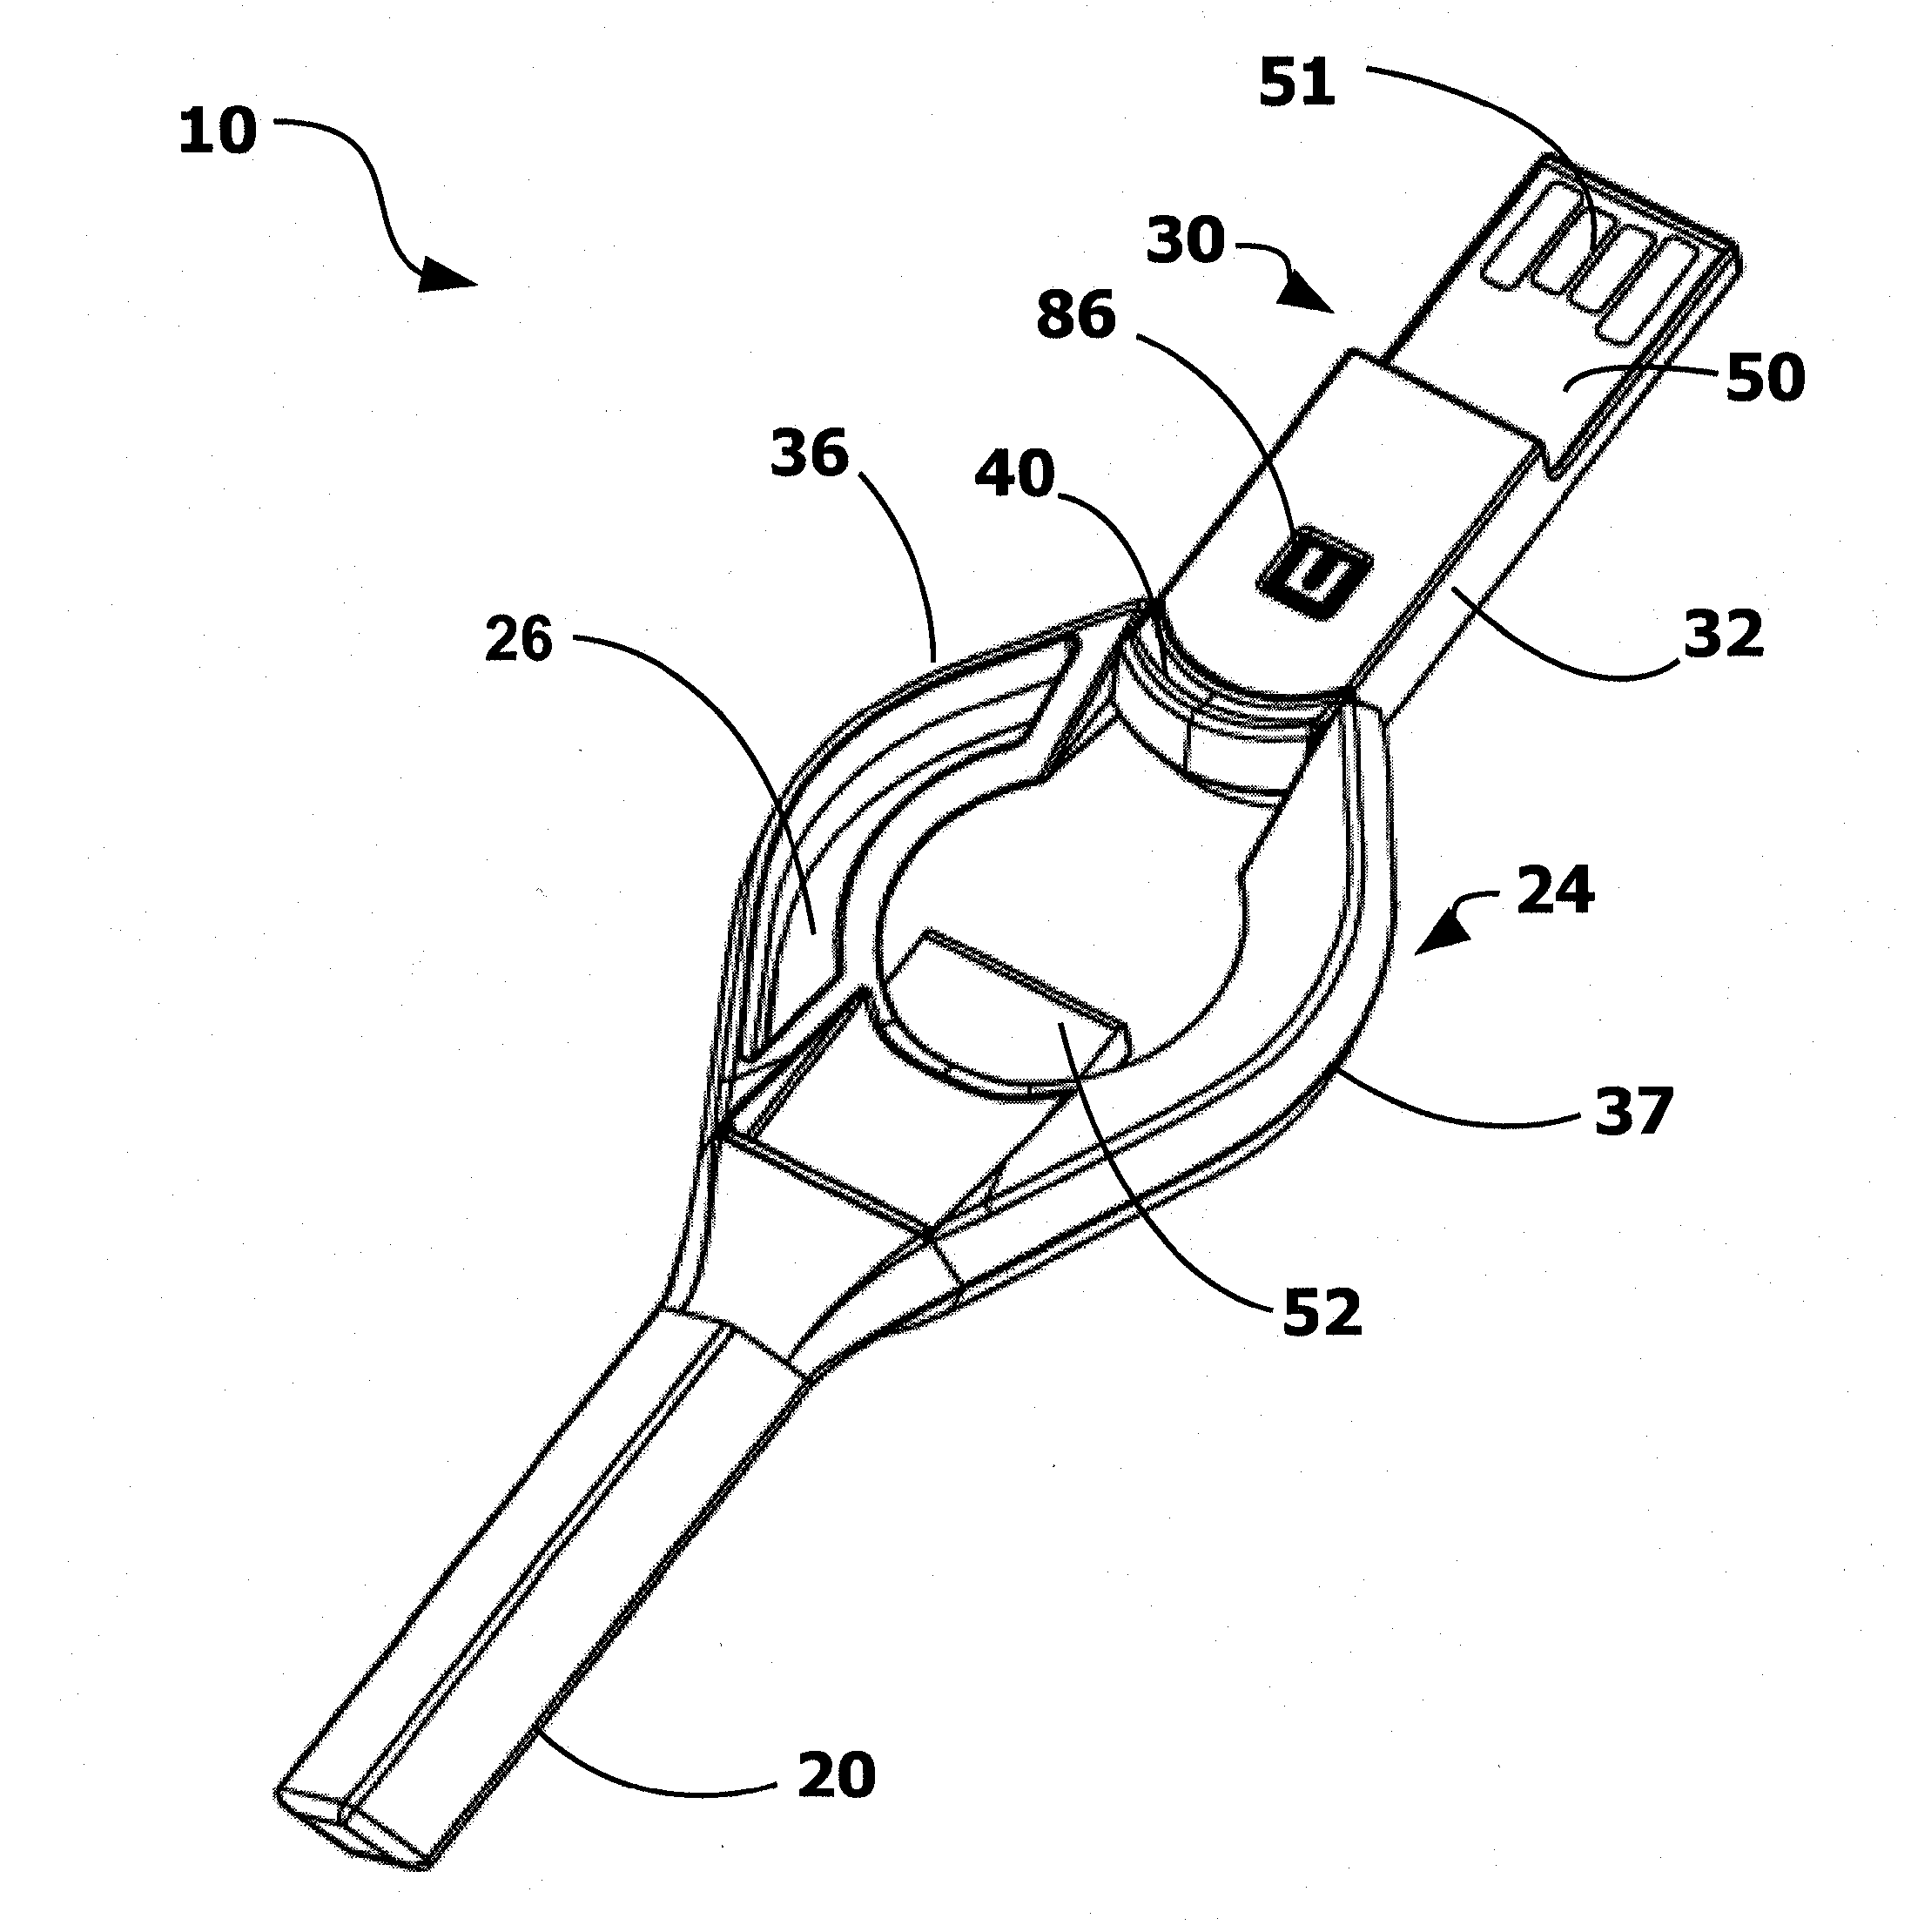 A portable electronic device integrated with a key